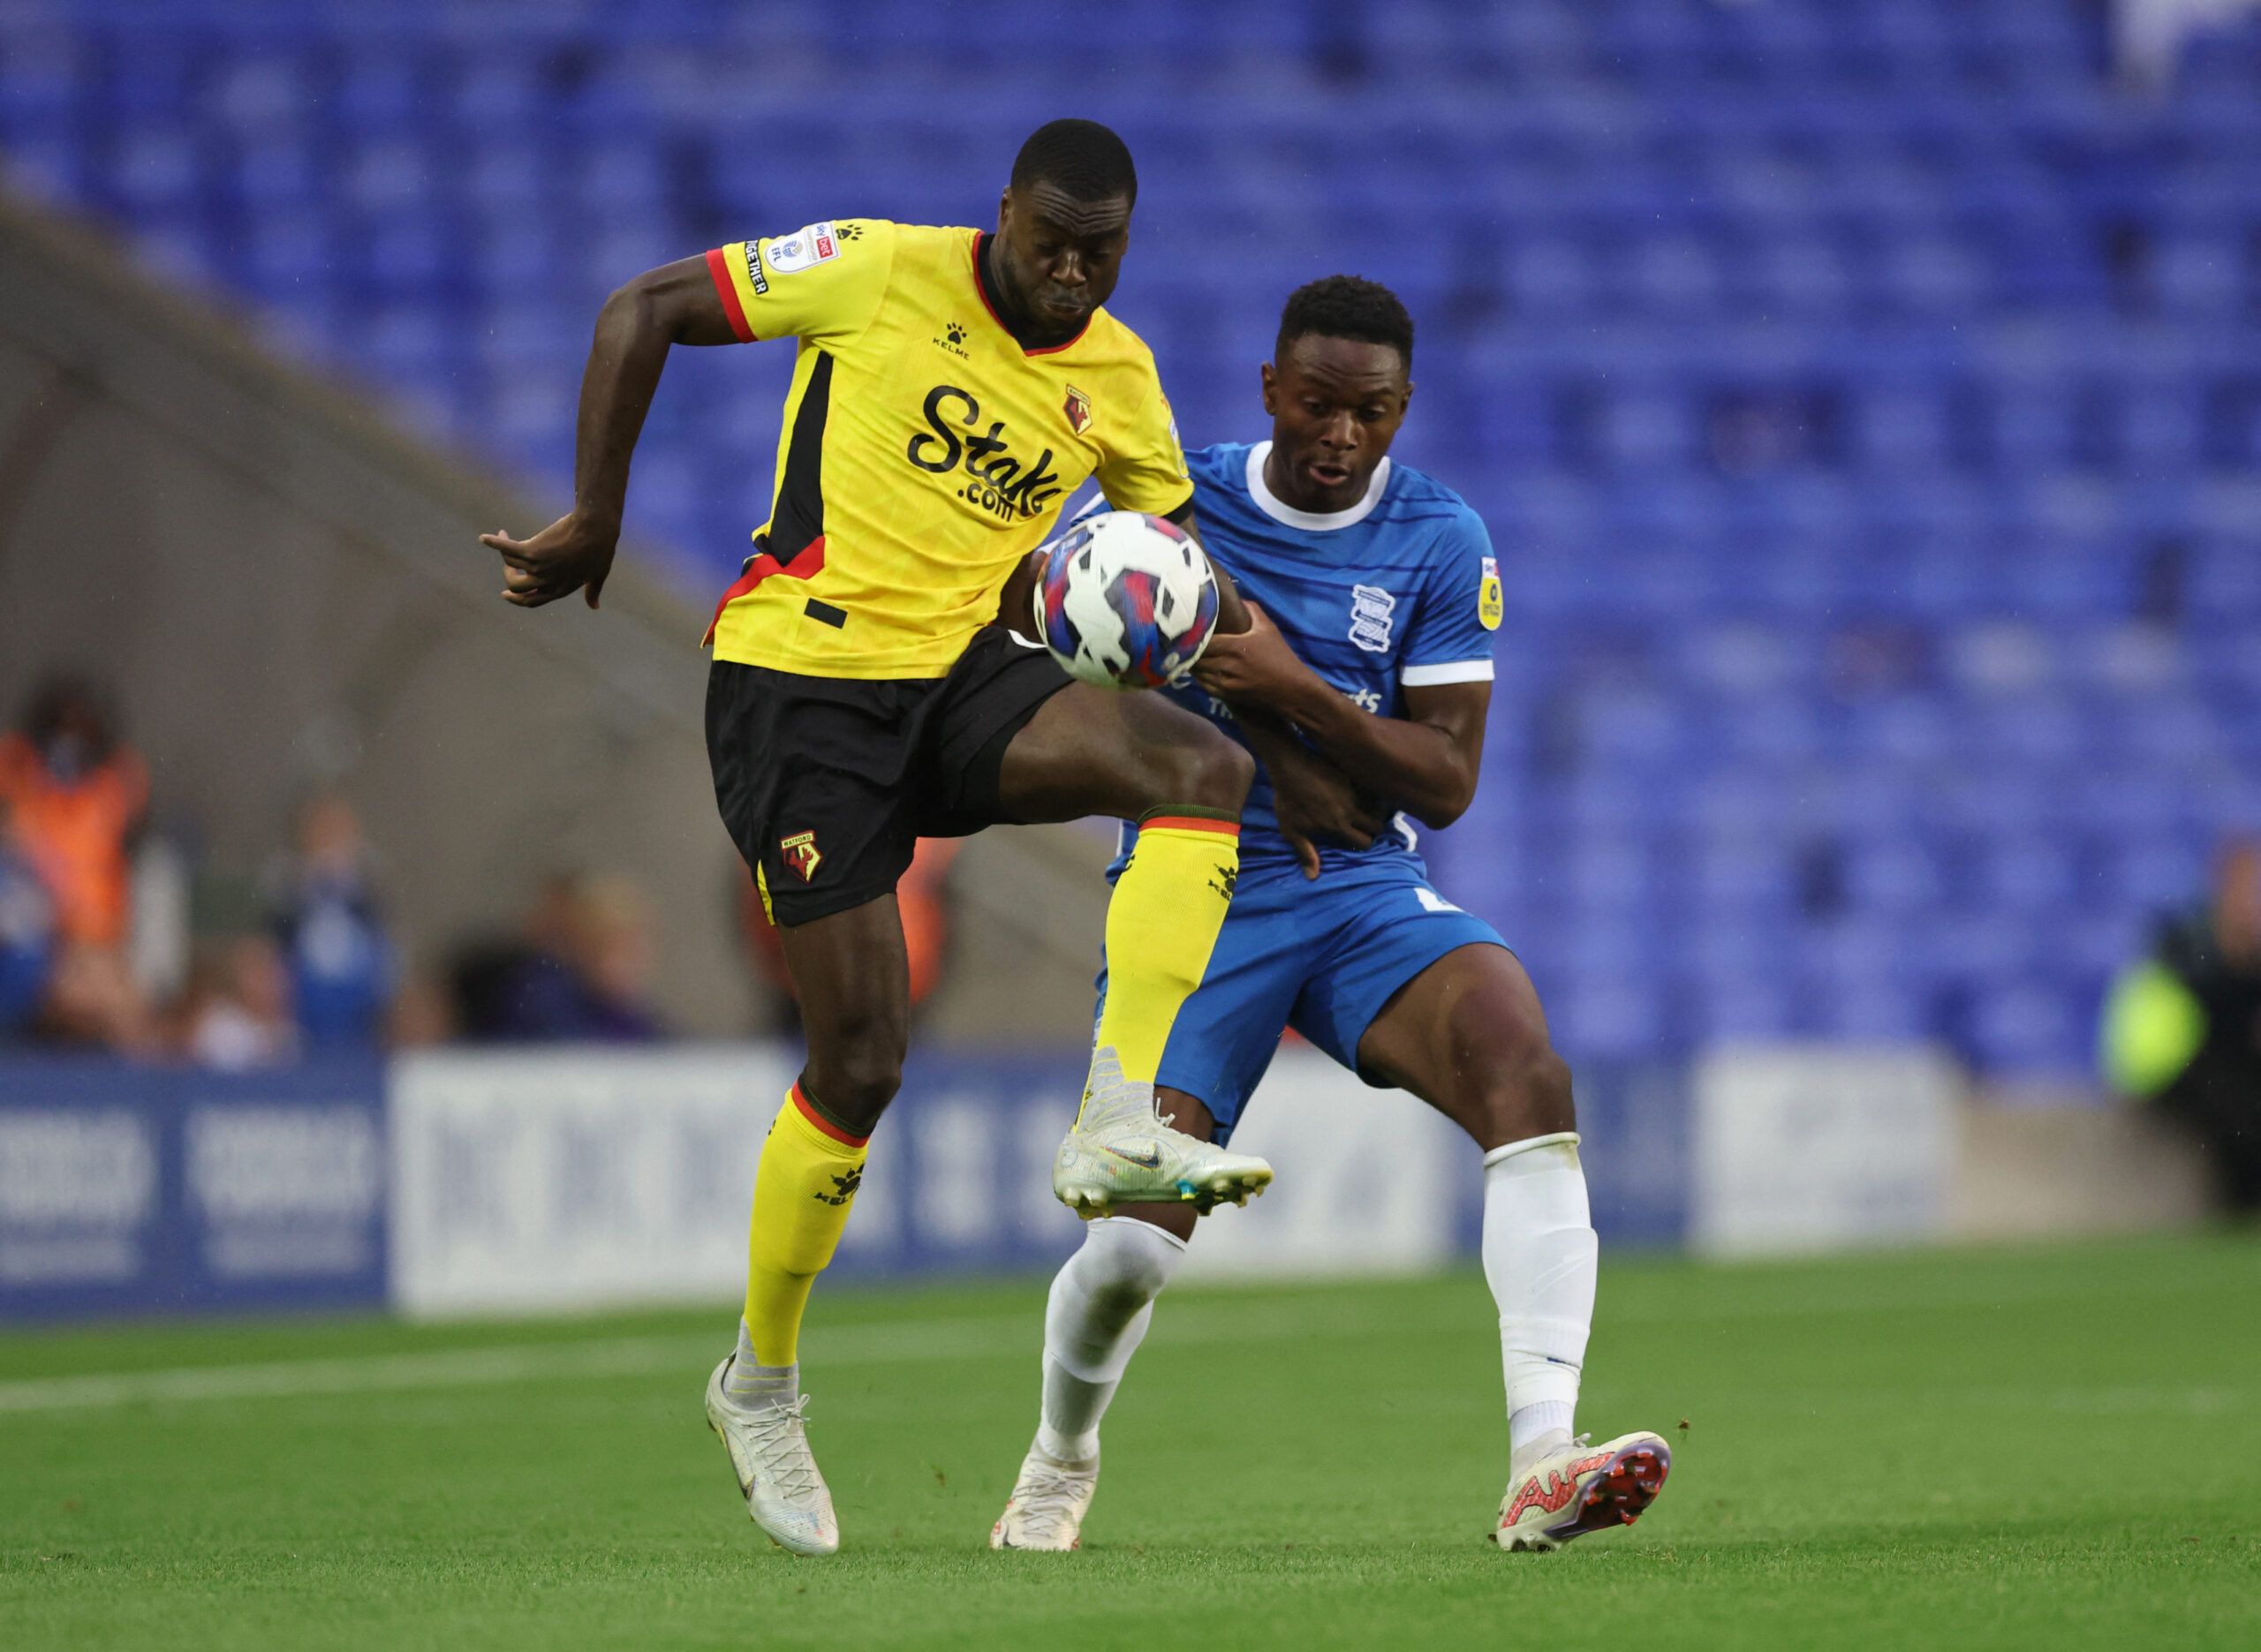 Soccer Football - Birmingham City v Watford - St Andrew's, Birmingham, Britain - August 16, 2022 Watford's Ken Sema in action with Birmingham City's Josh Williams Action Images/Carl Recine EDITORIAL USE ONLY. No use with unauthorized audio, video, data, fixture lists, club/league logos or 'live' services. Online in-match use limited to 75 images, no video emulation. No use in betting, games or single club /league/player publications.  Please contact your account representative for further detail